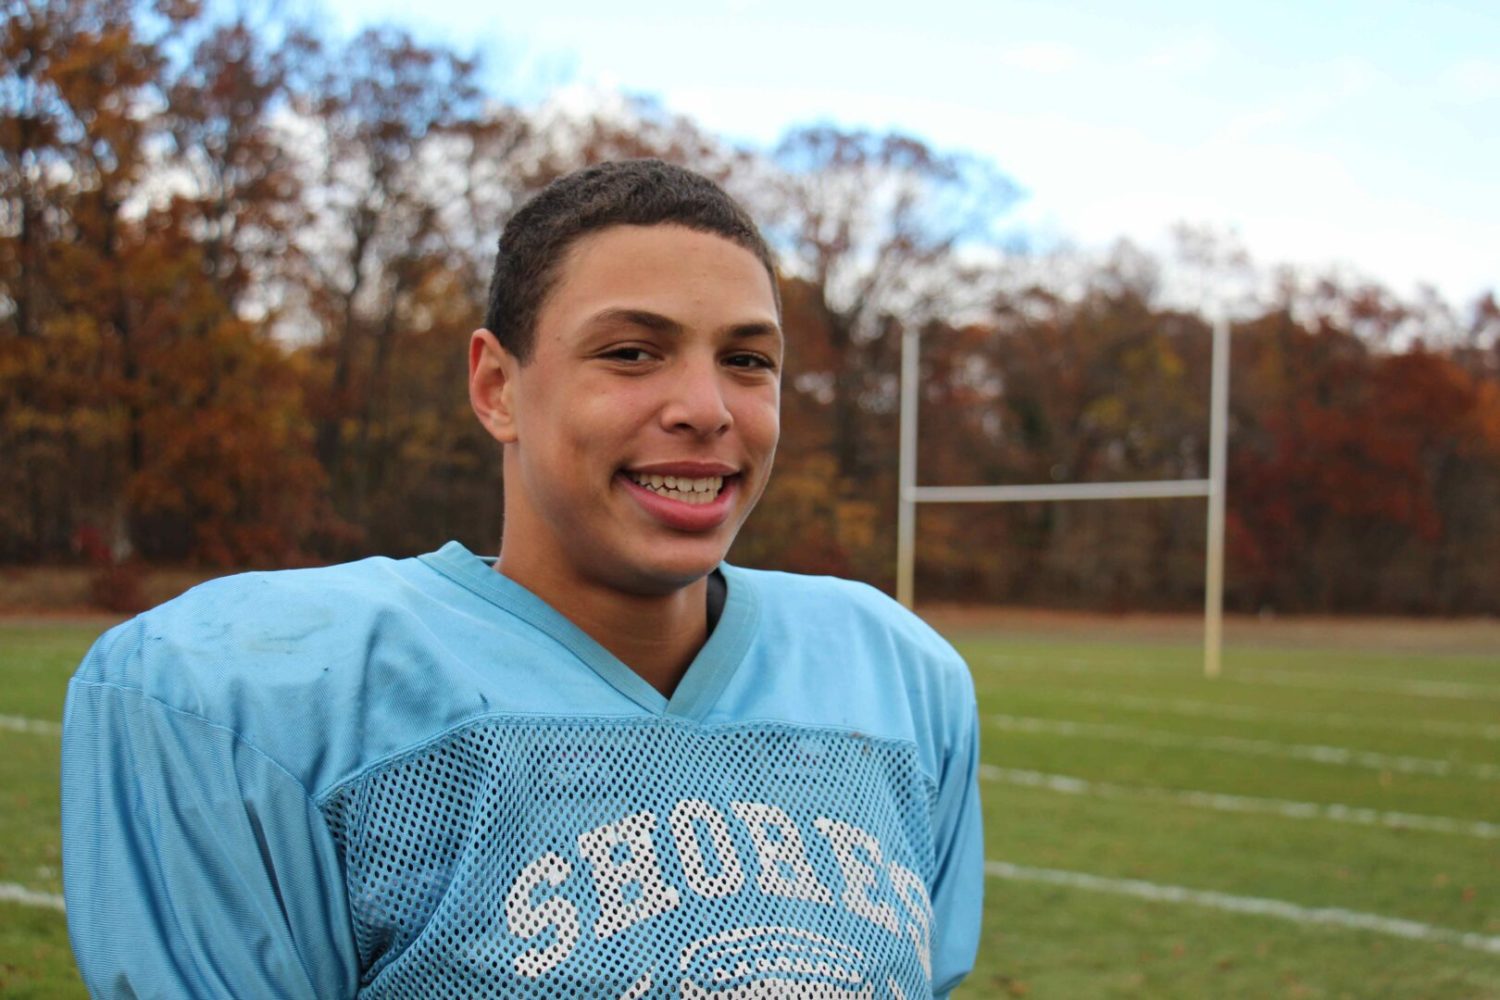 Tyree Jackson has one item left on his prep football checklist: Get to Ford Field and win a title for Mona Shores